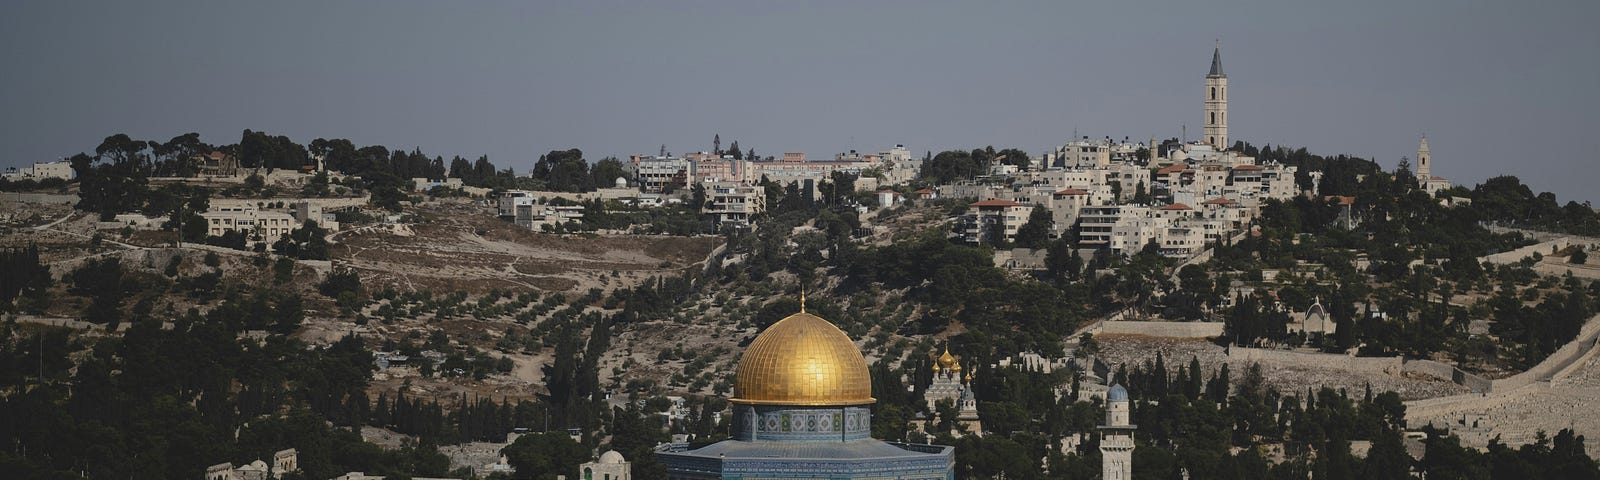 Jerusalem with the Dome of the Rock in the center.